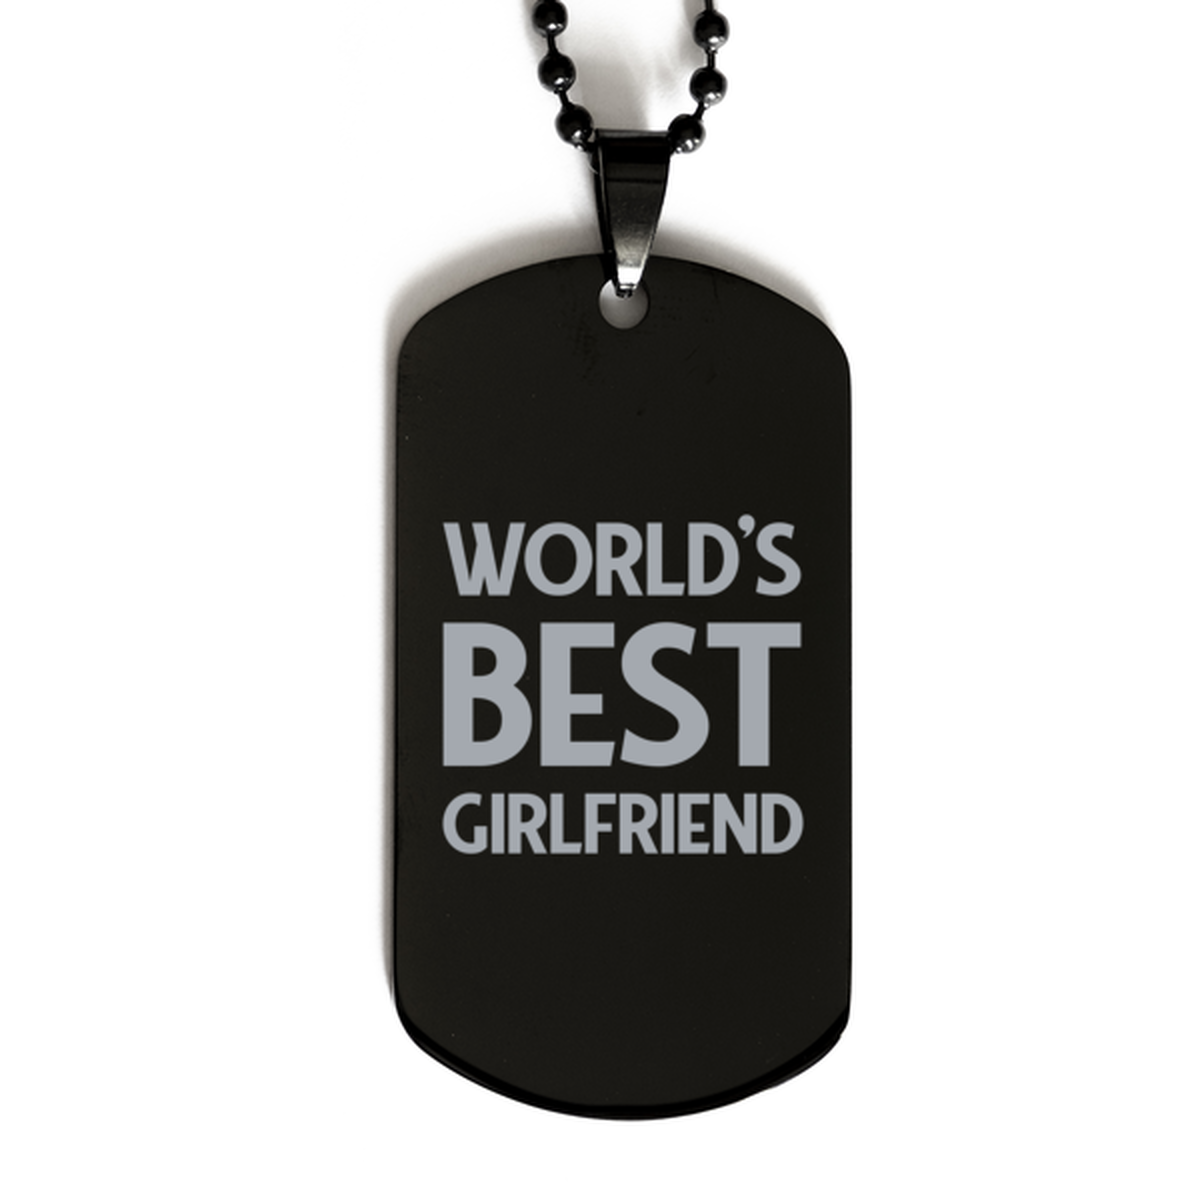 Worlds Best Girlfriend Gifts, Funny Black Engraved Dog Tag For Girlfriend, Birthday Presents For Women